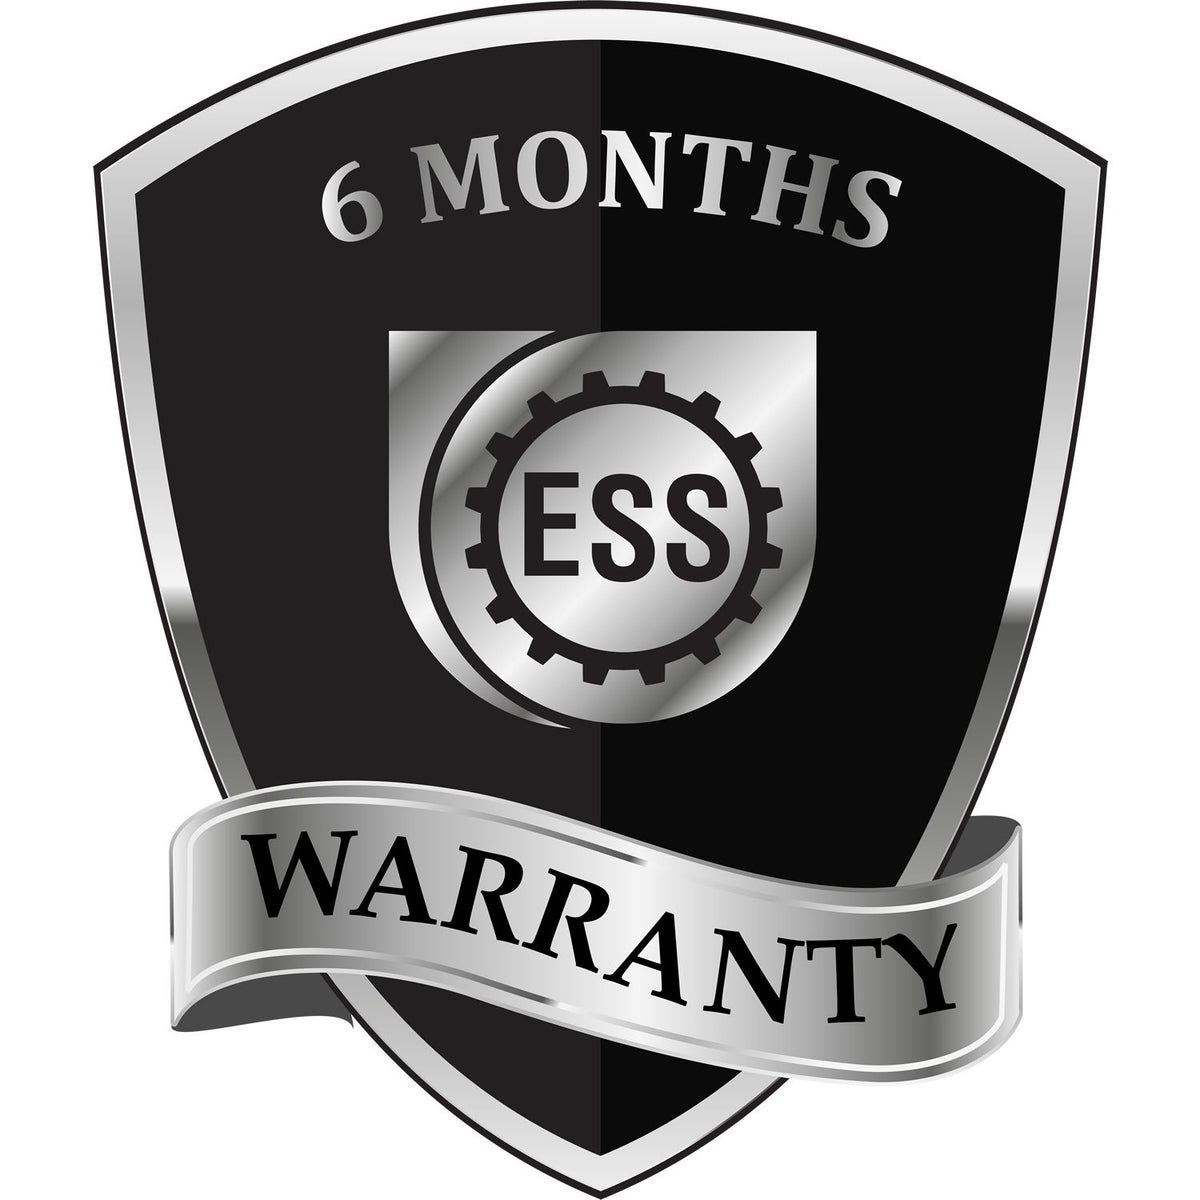 A badge or emblem showing a warranty icon for the PSI Montana Notary Stamp